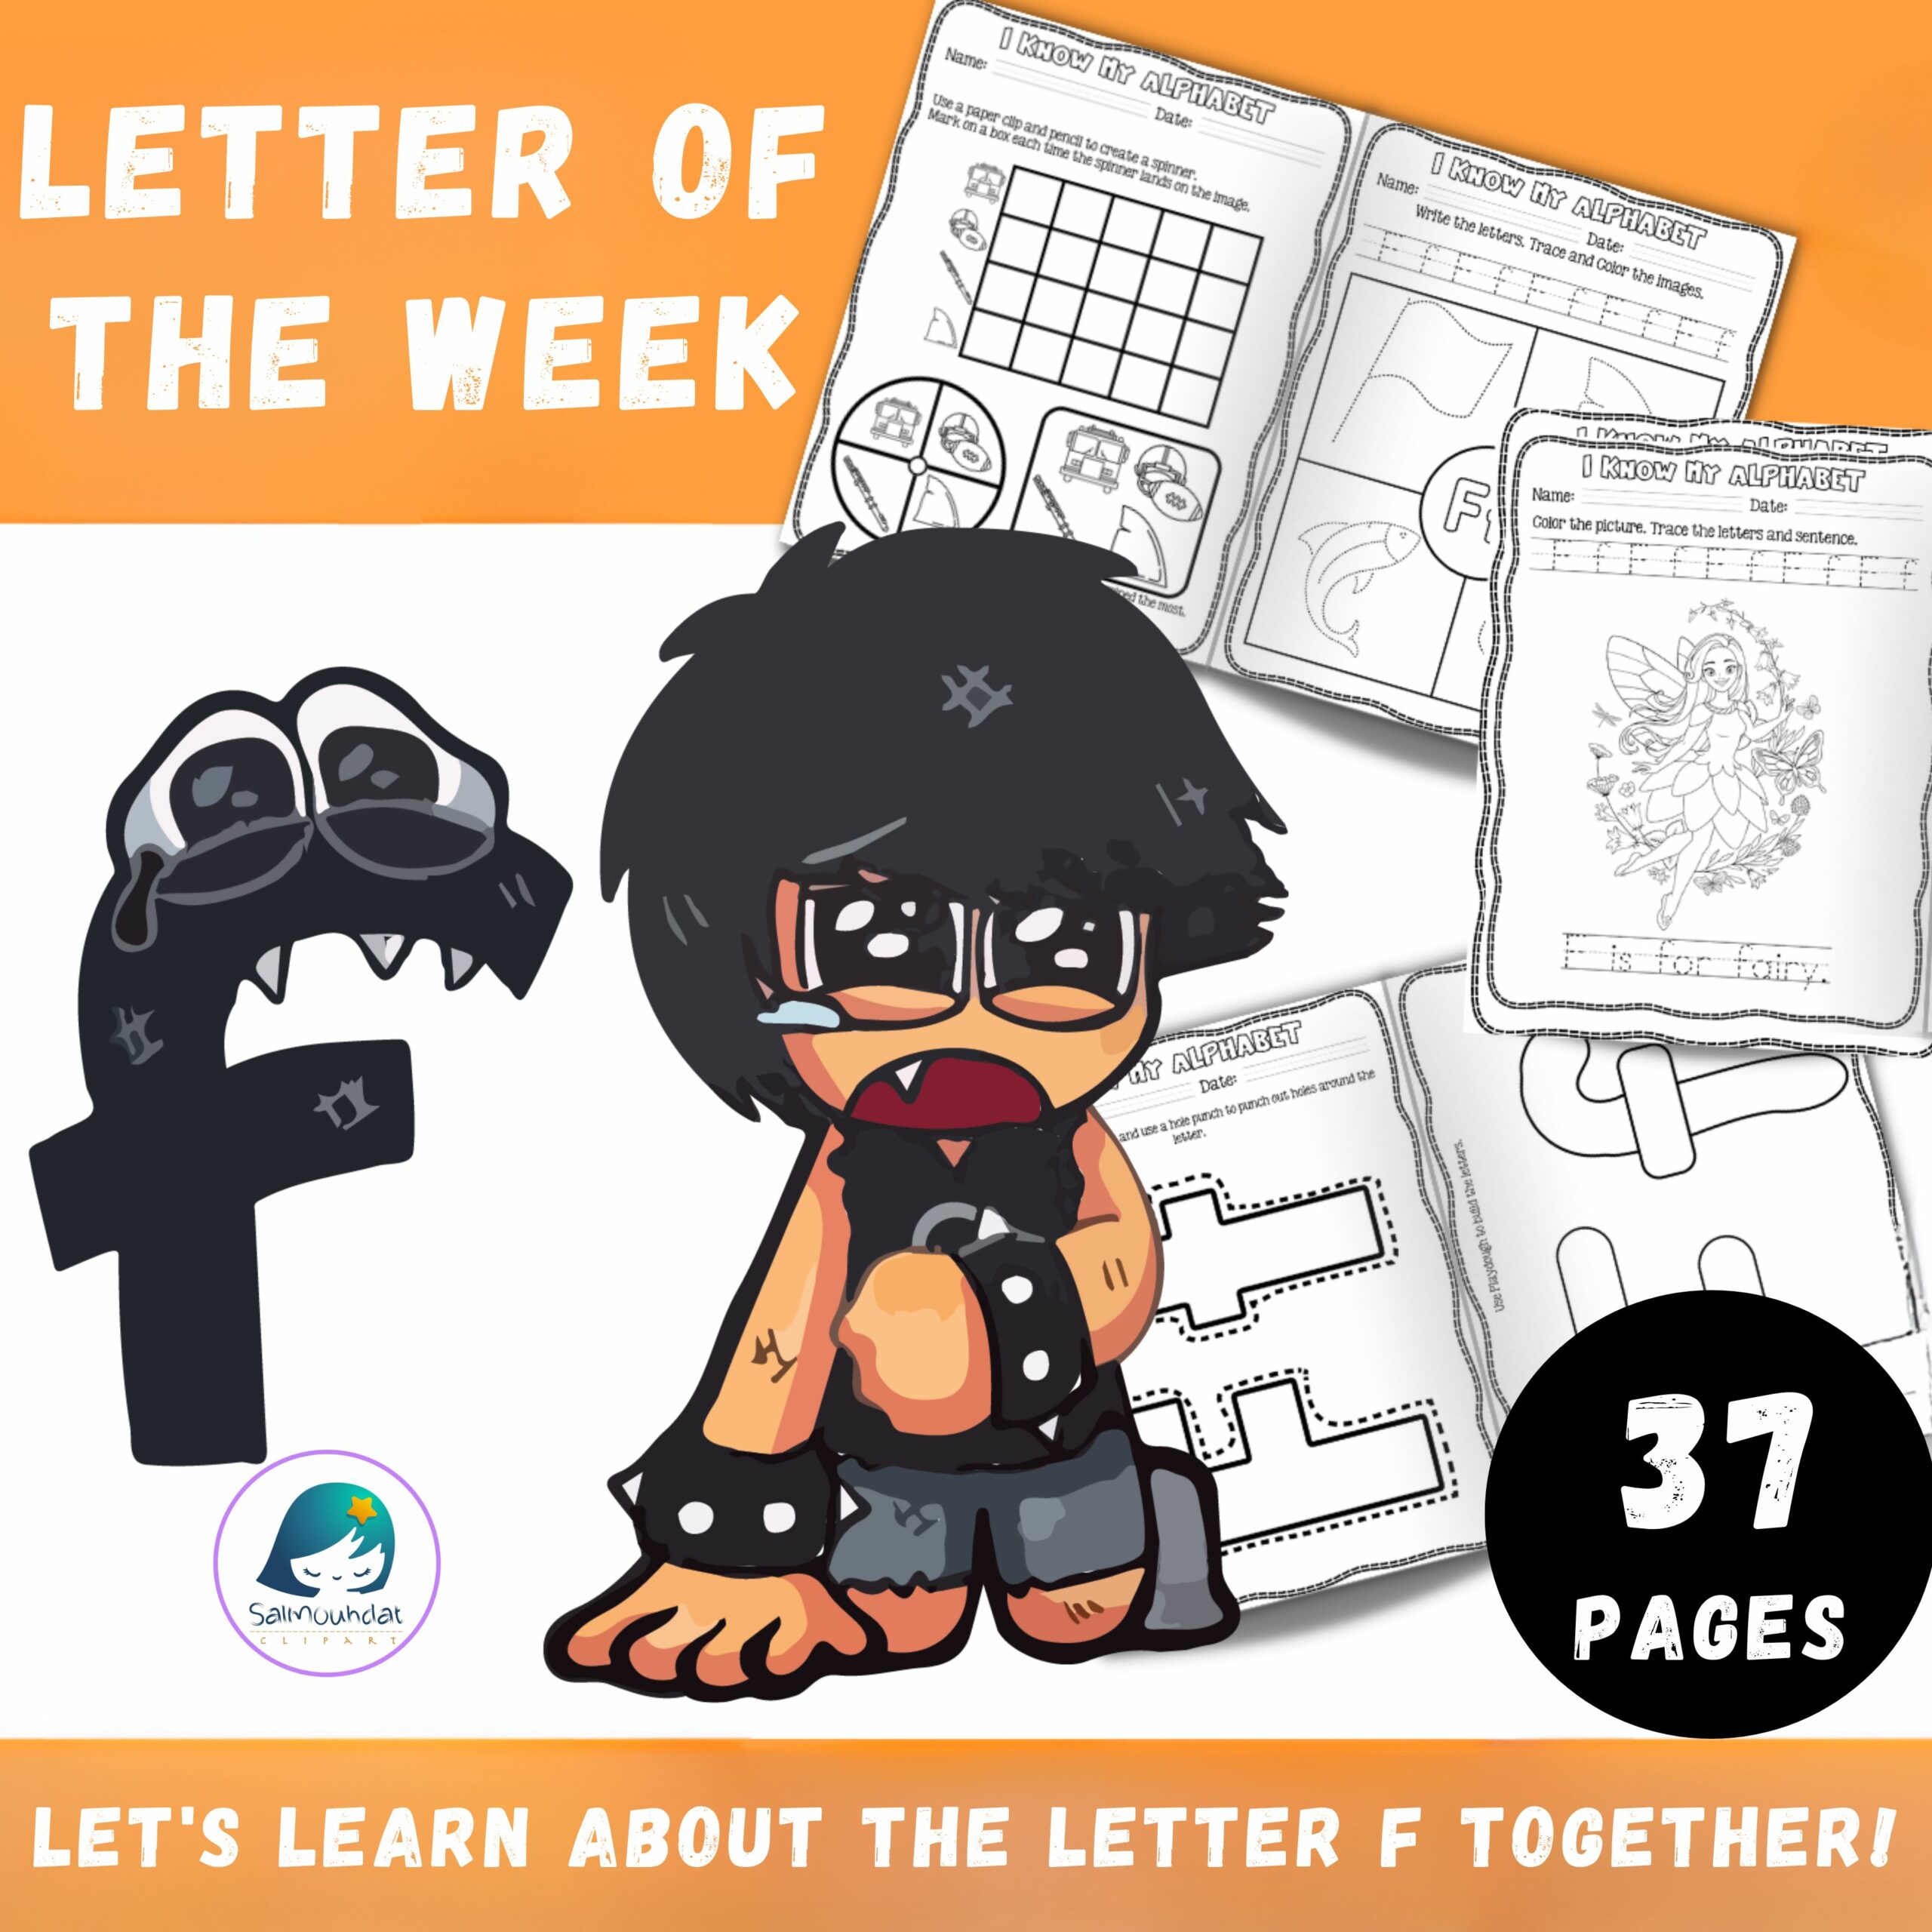 Letter of the week letter f